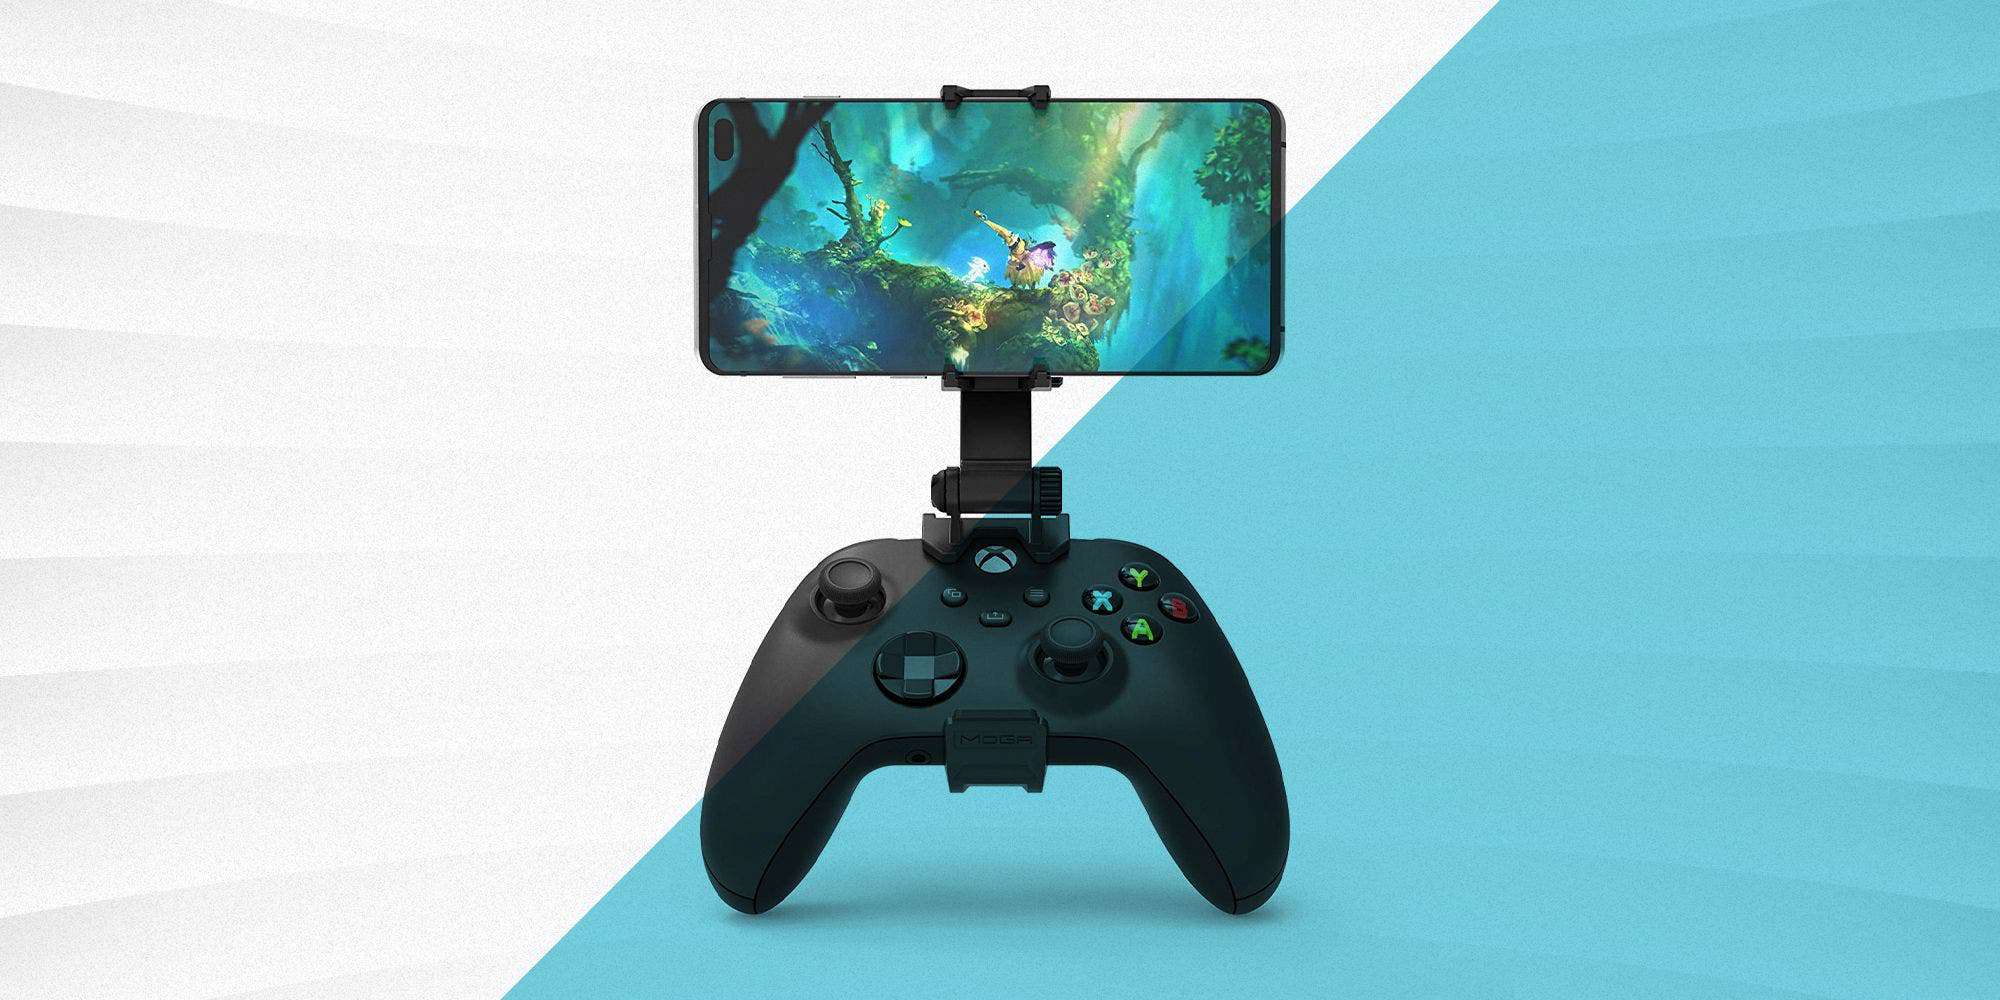 The Backbone One mobile gamepad now works with Android phones